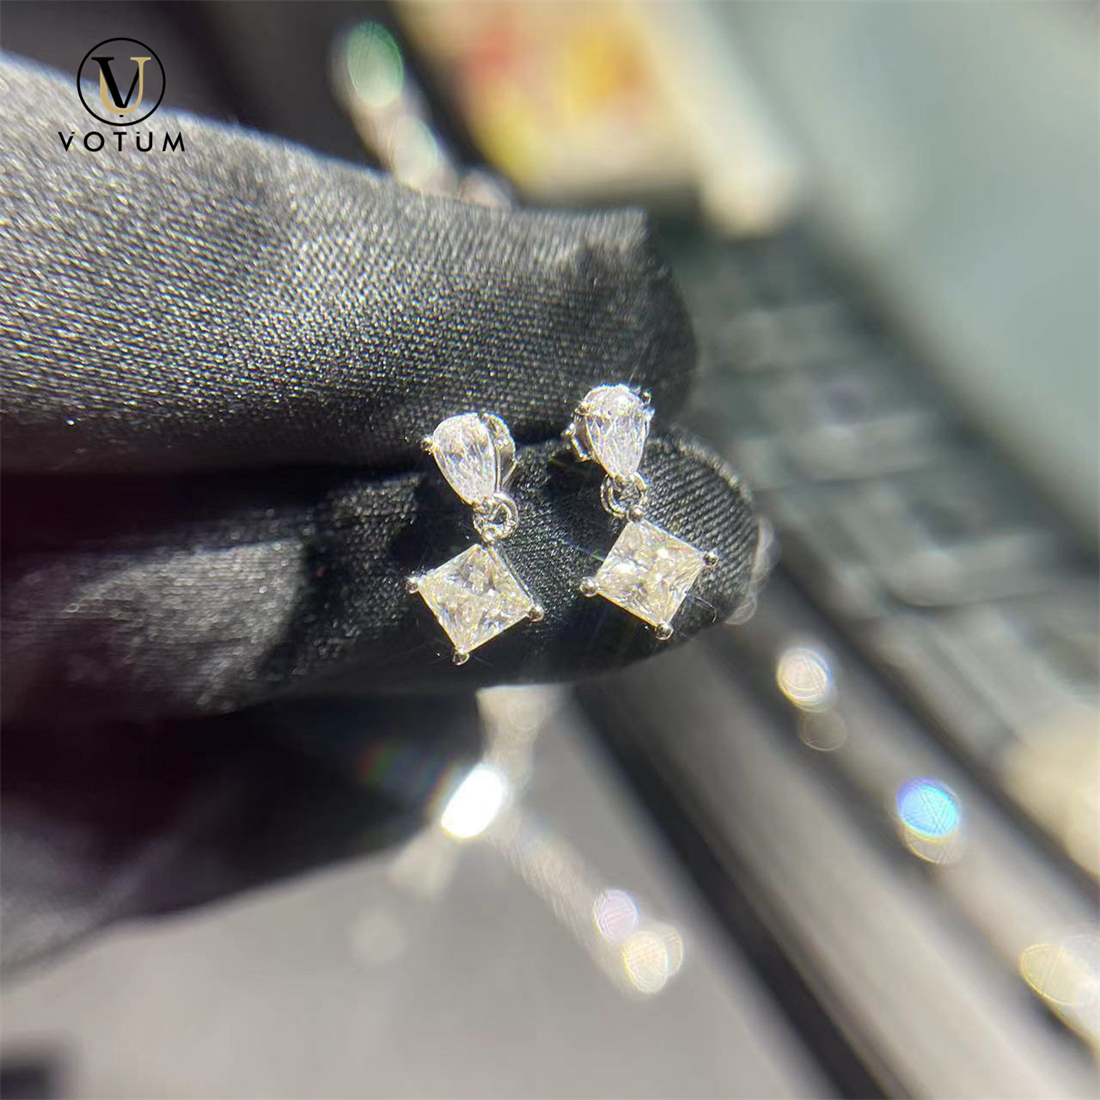 Votum Factory Wholesale Vvs Moissanite Princess Cut Square Eardrop Earrings with 925 Silver Sparking Diamonds 18K Gold Plated Jewelry Jewellery Accessories